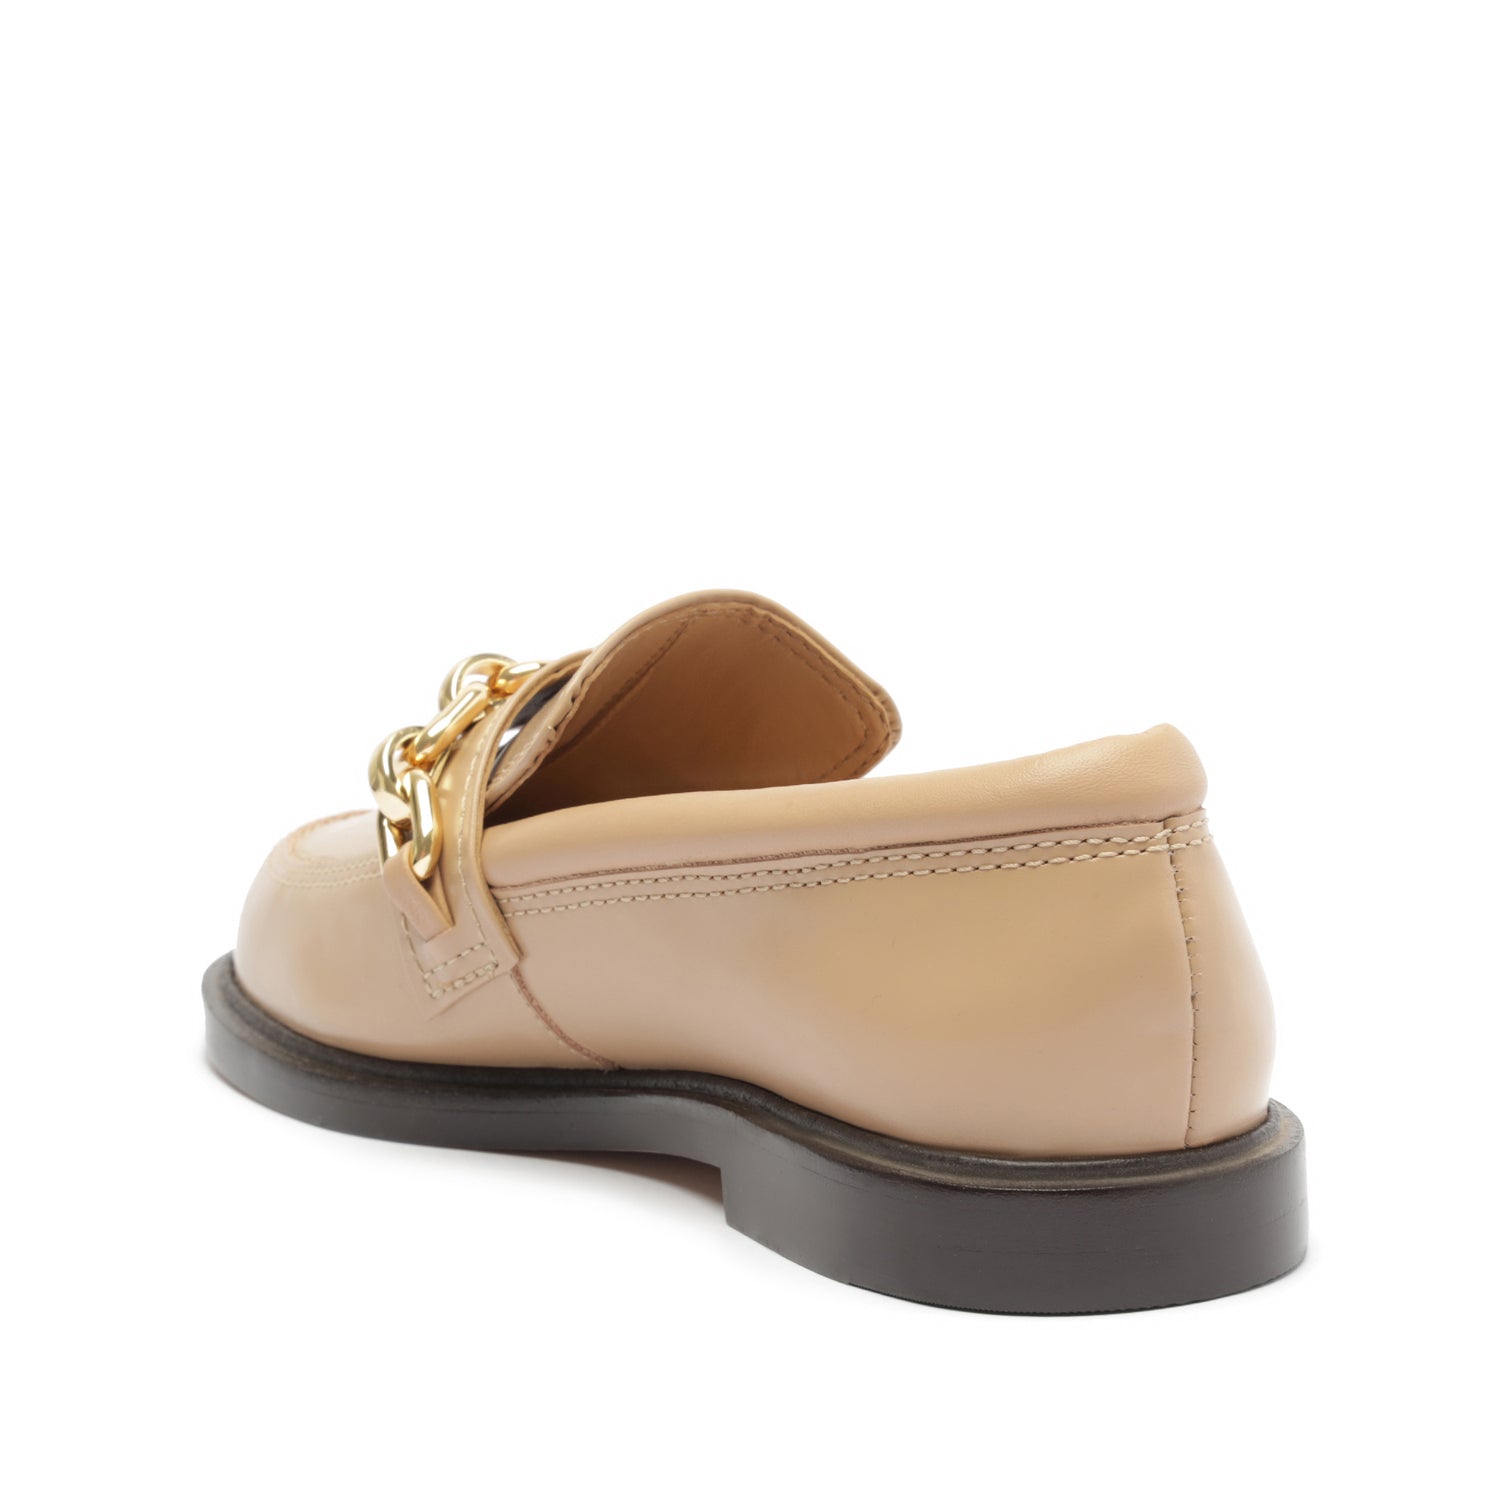 Dannie Leather Flat True Beige Leather